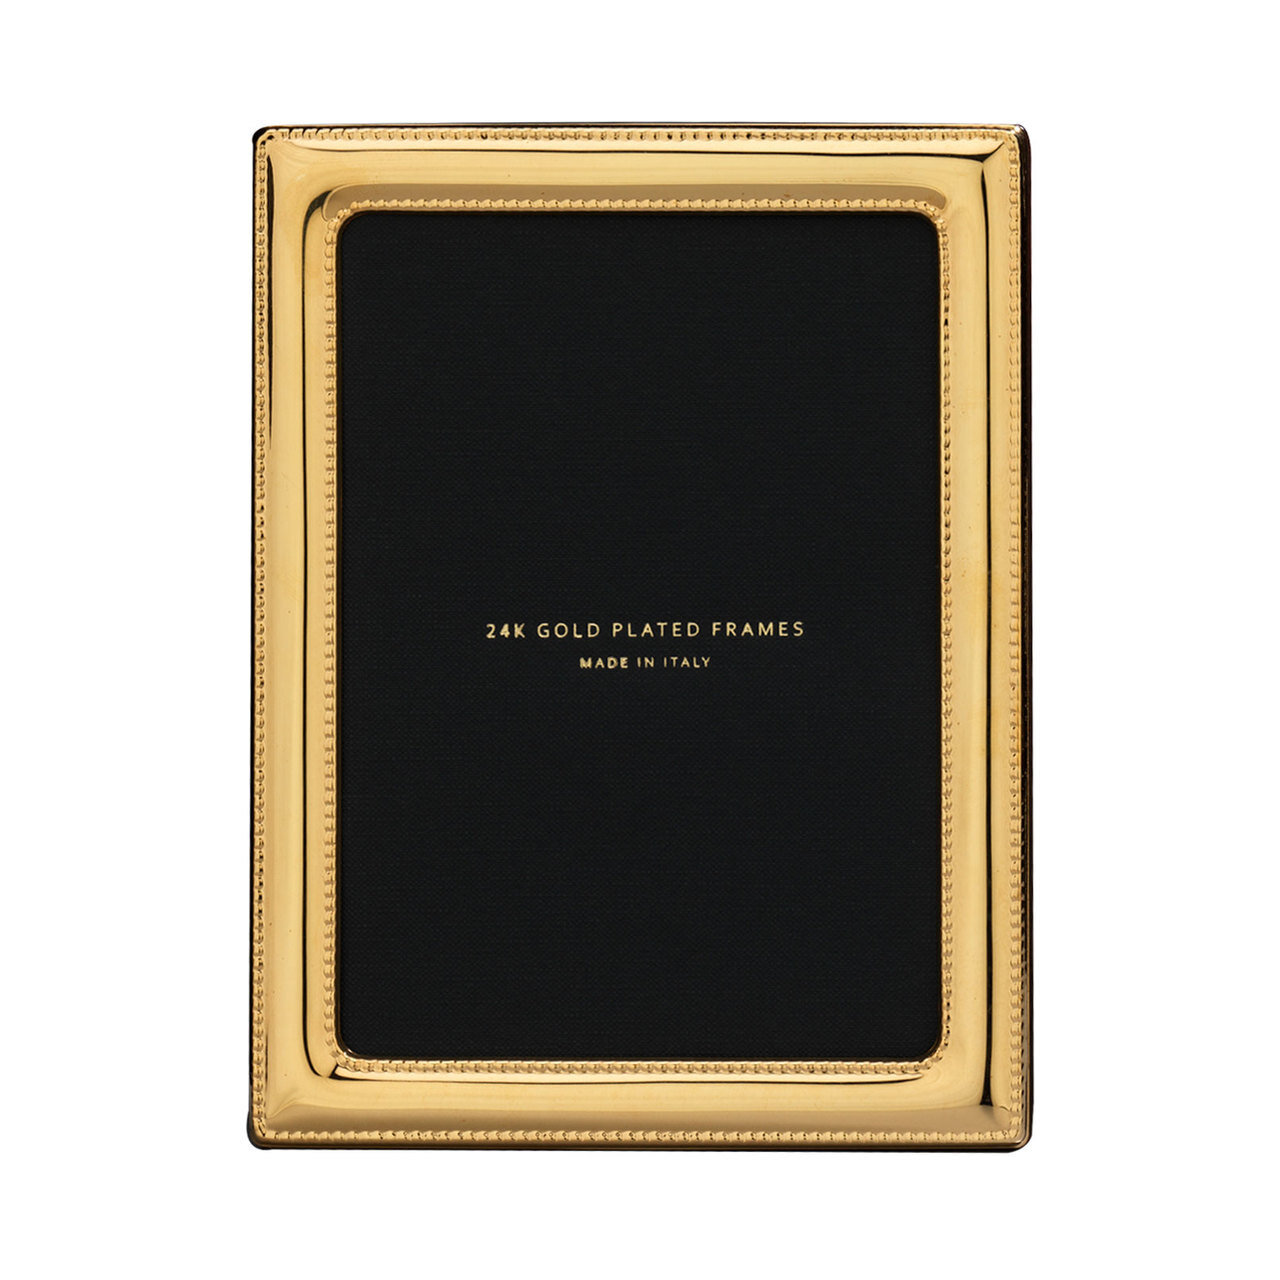 Cunill Pearls 5 x 7 Inch Picture Frame - 24k Gold Plated 0.5 Microns